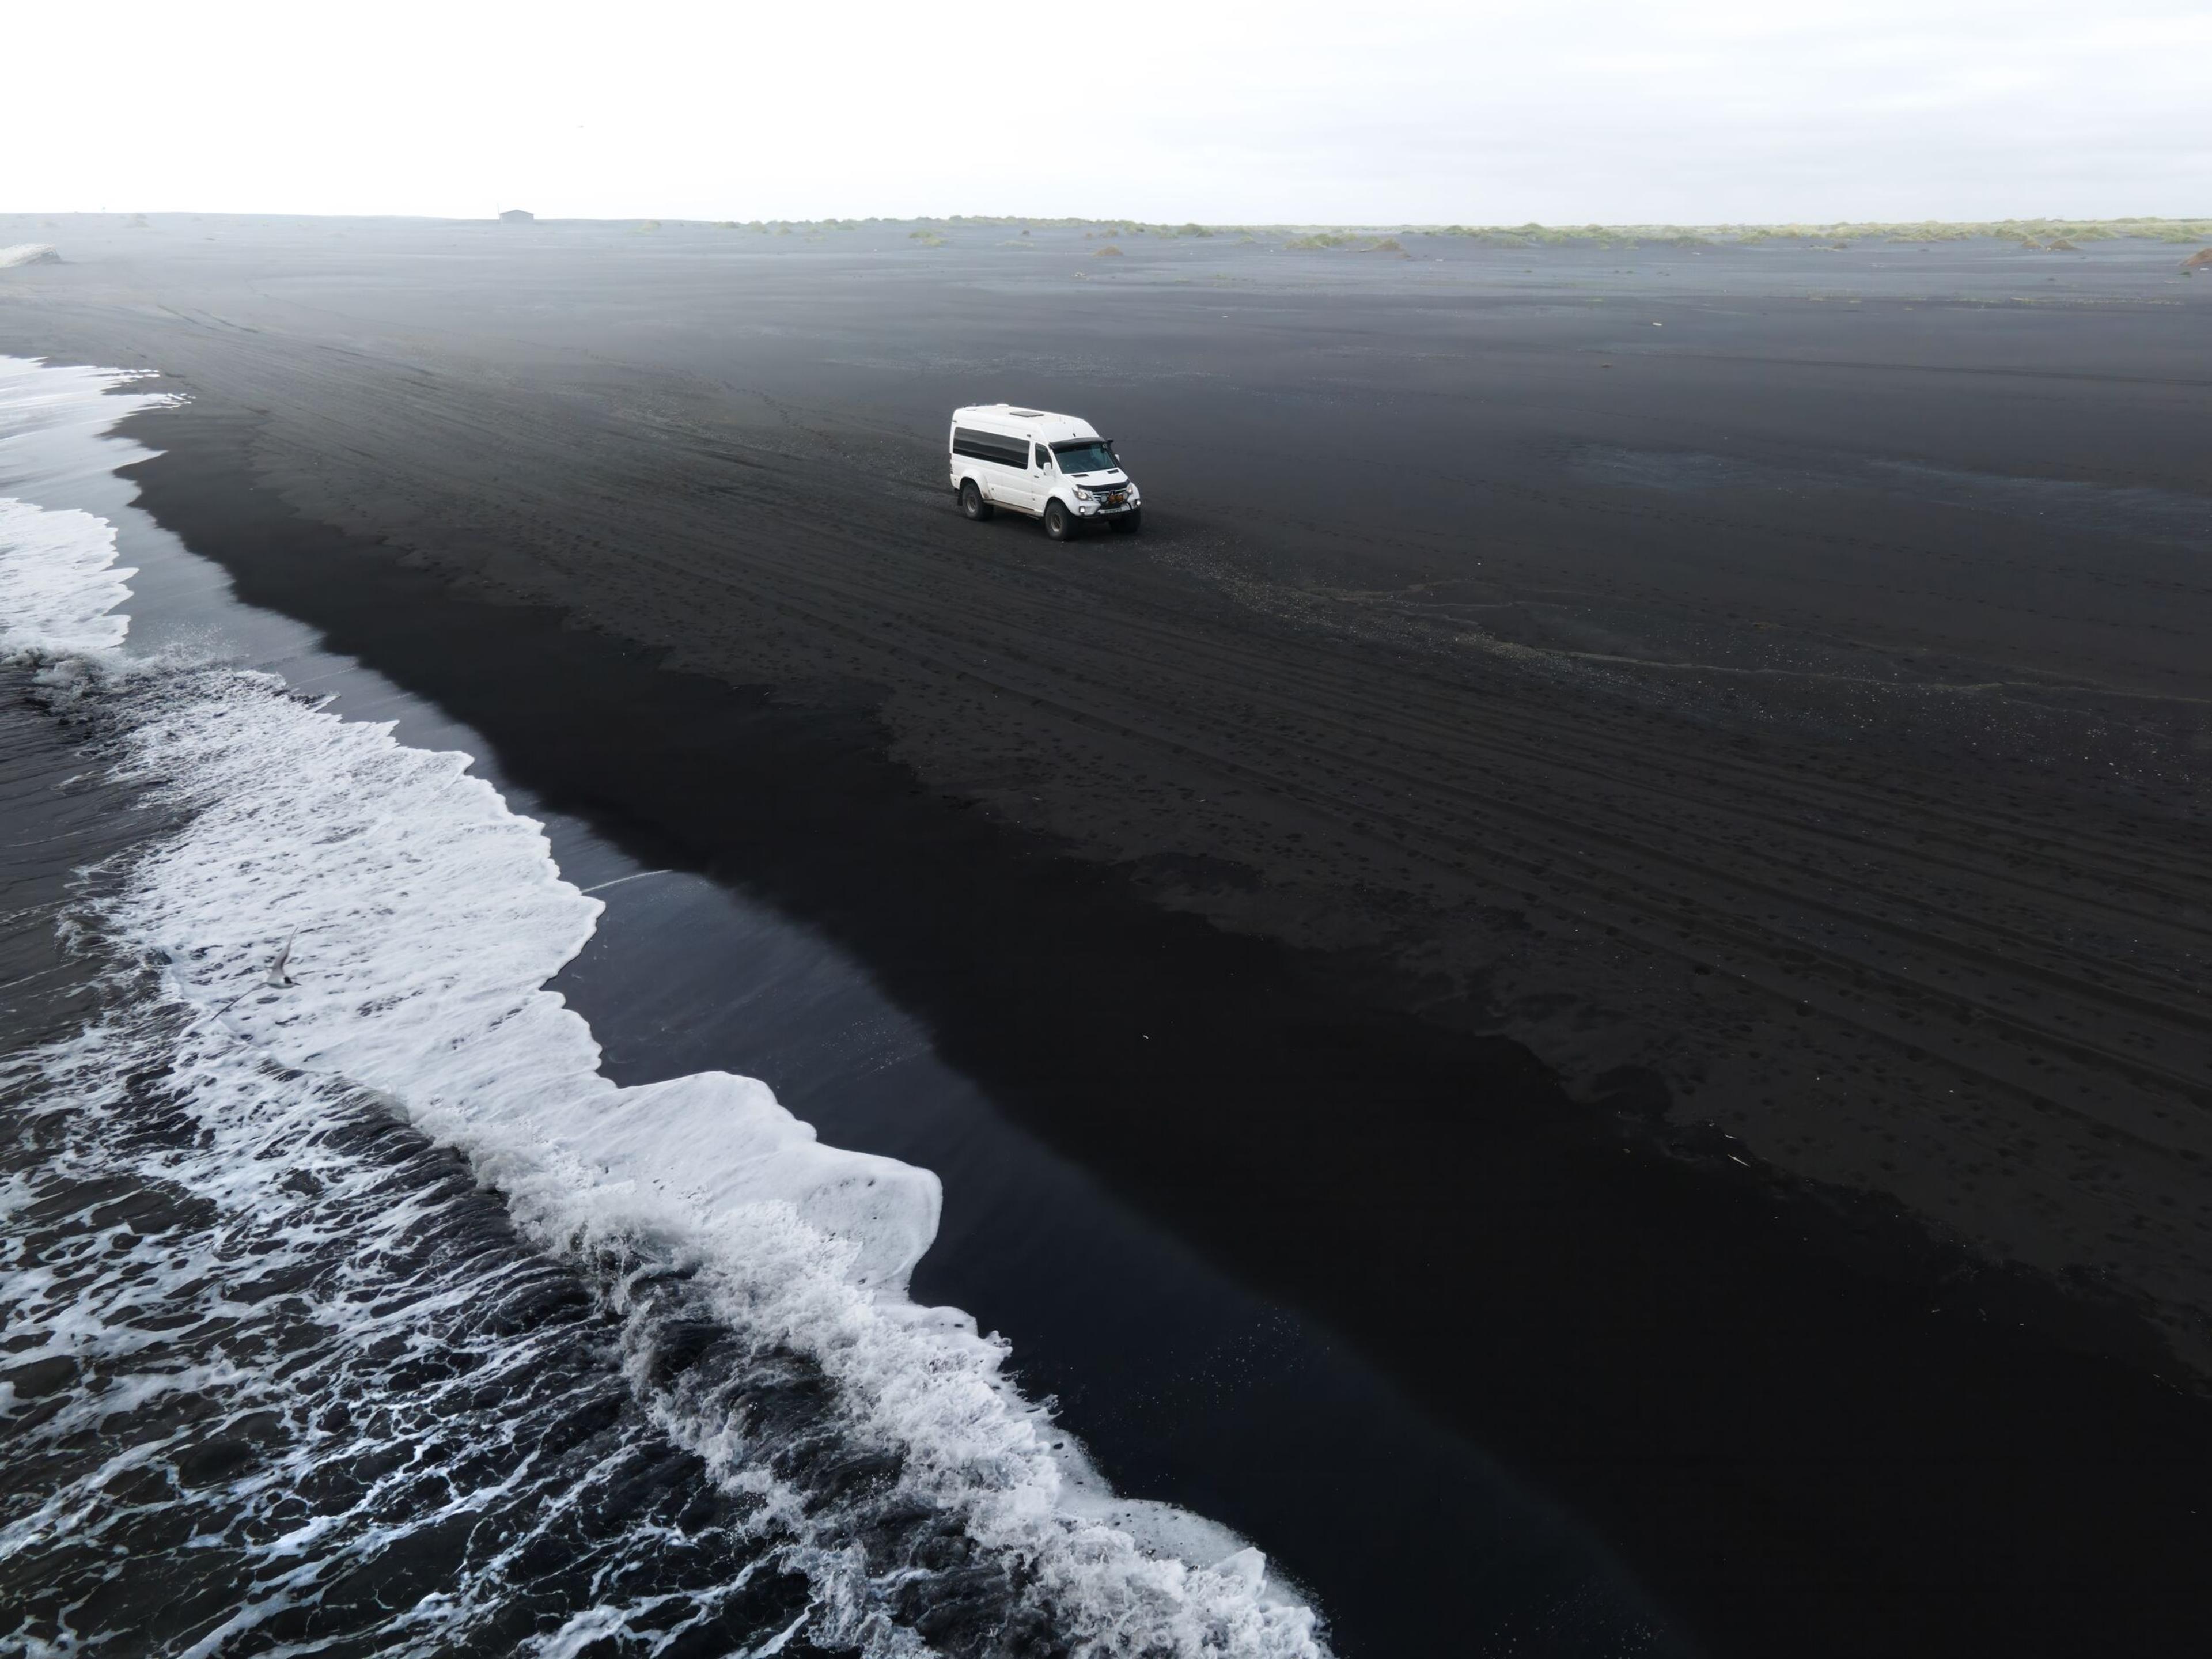 A large white monster truck making its way across a black sand beach by the shoreline.